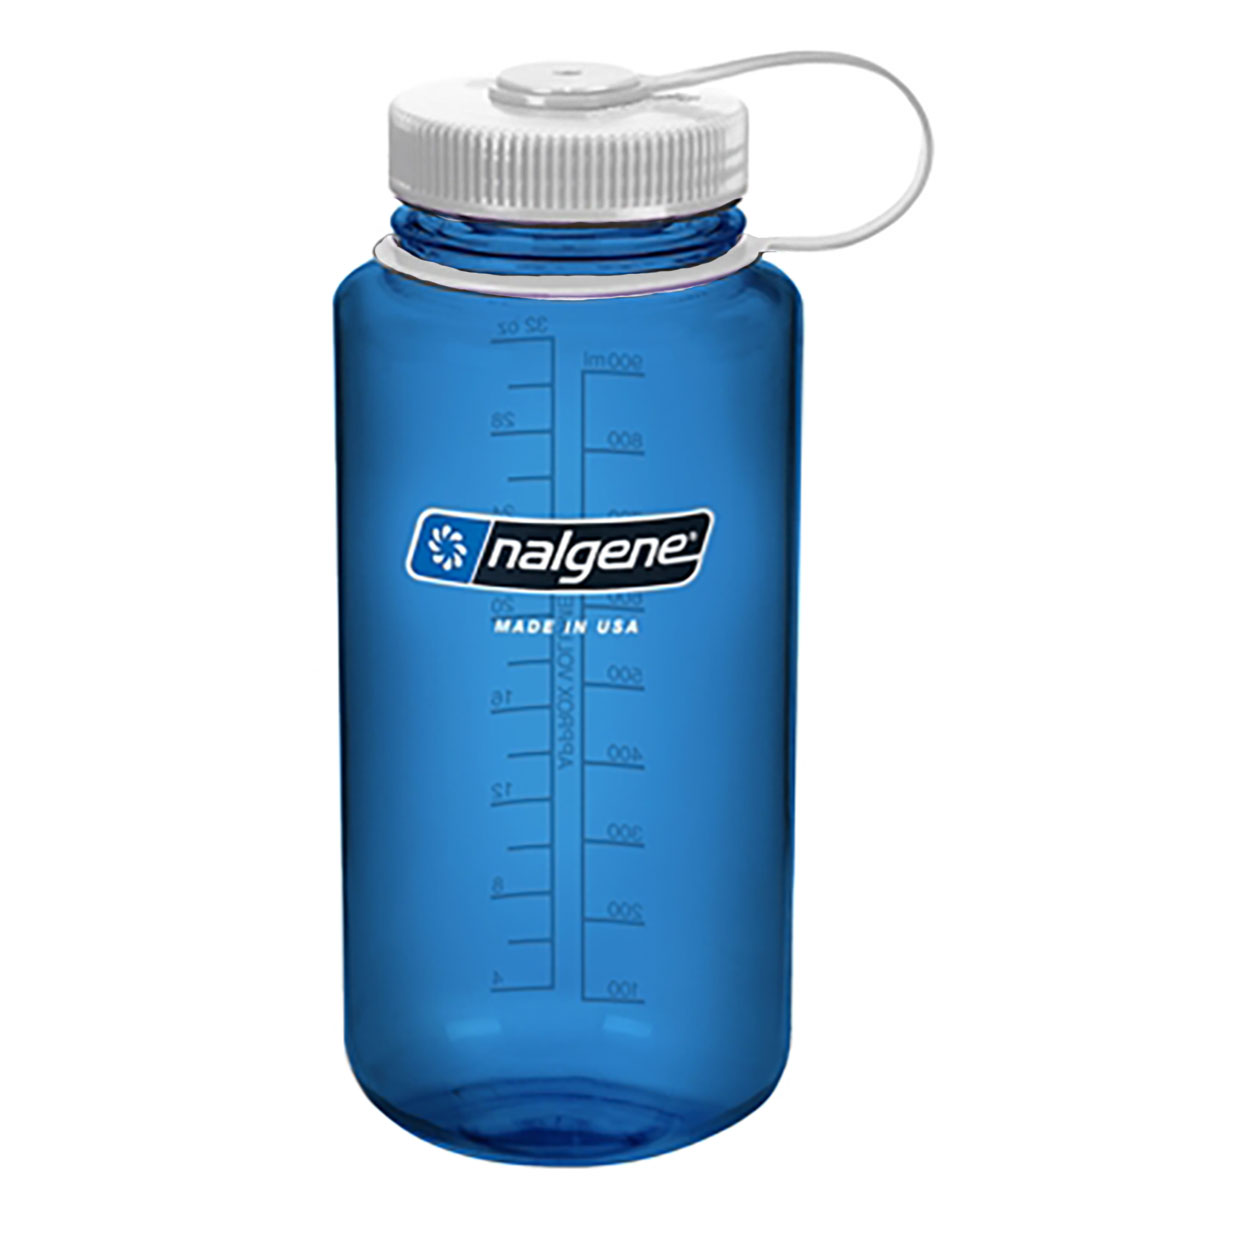 Columbia 32oz Water Bottle Plastic Blue Silver Wide Mouth